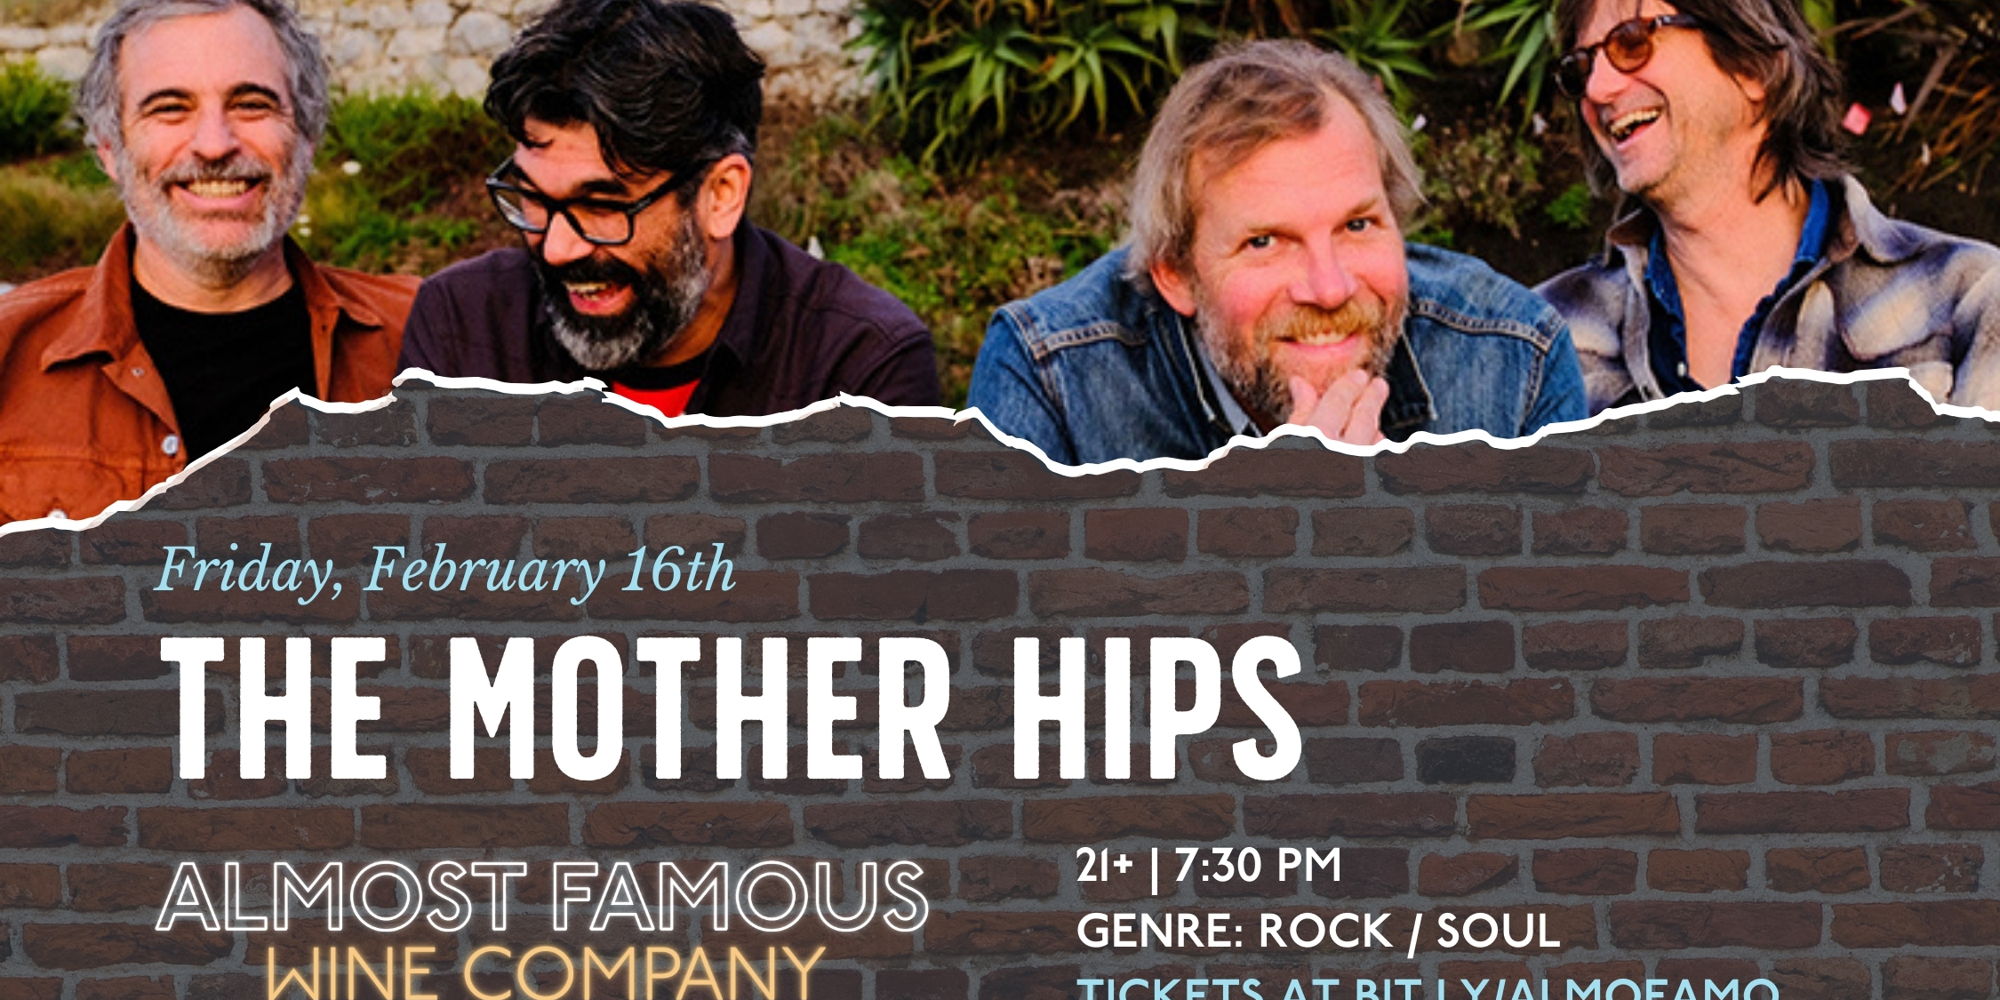 SOLD OUT: Legendary rock-soul pioneers The Mother Hips at Almost Famous promotional image